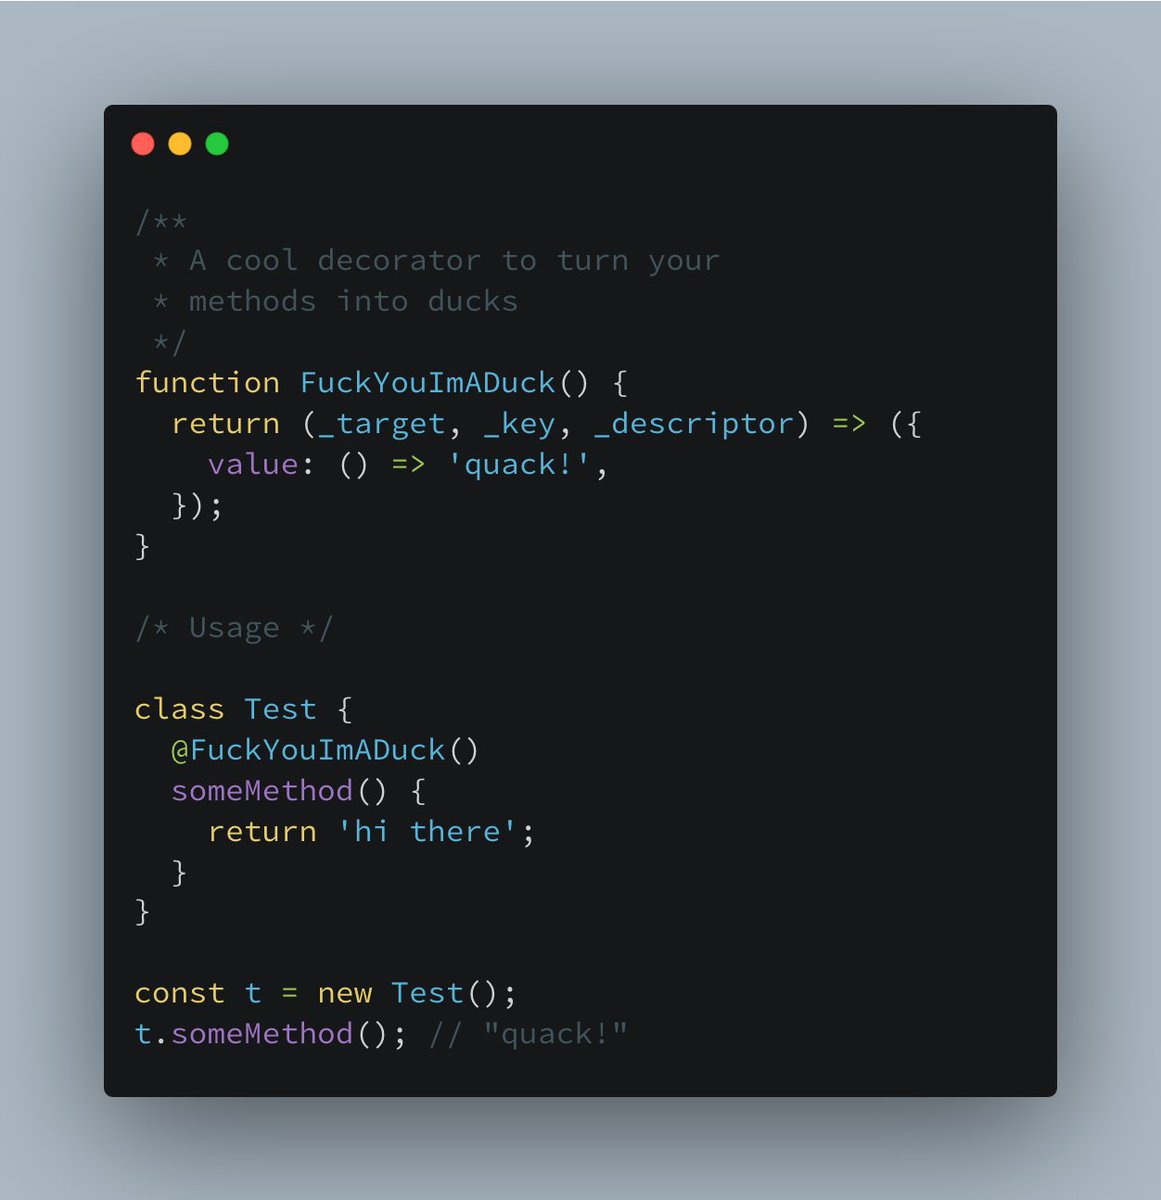 A concise example of why I really don't like decorators that much. IMO, decorators should have been metadata only. We already have enough ways to duck-punch JavaScript into oblivion. 👊💥🦆